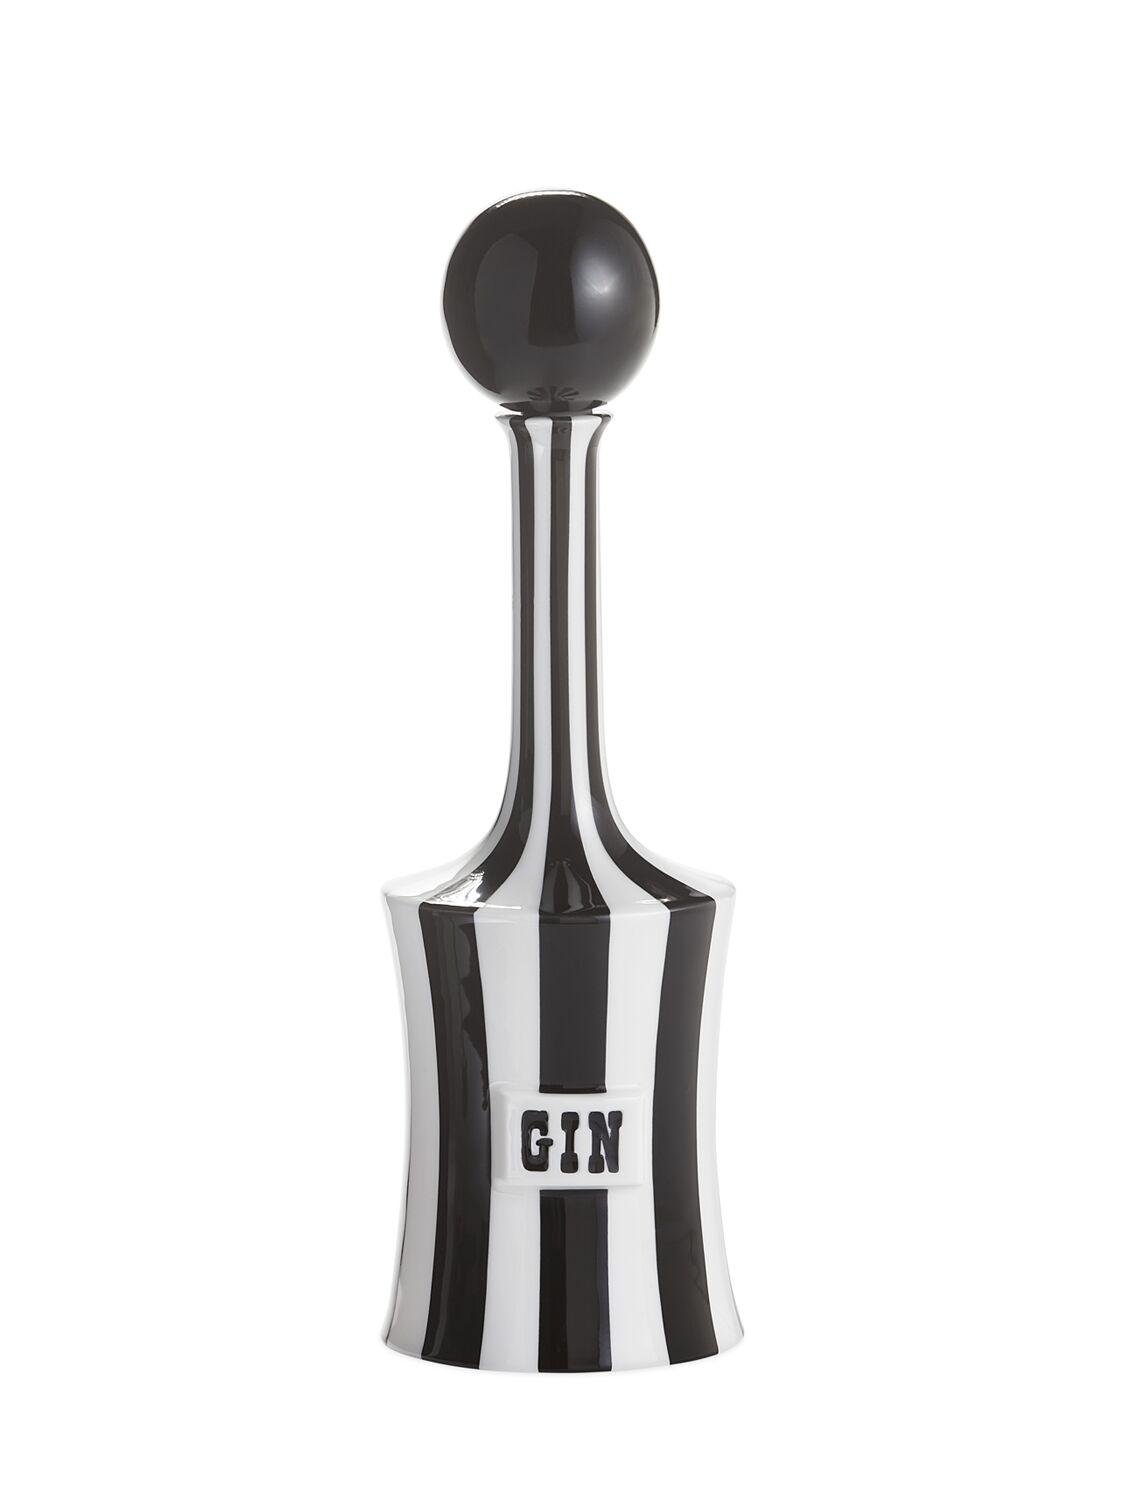 Gin Vice Decanter by JONATHAN ADLER